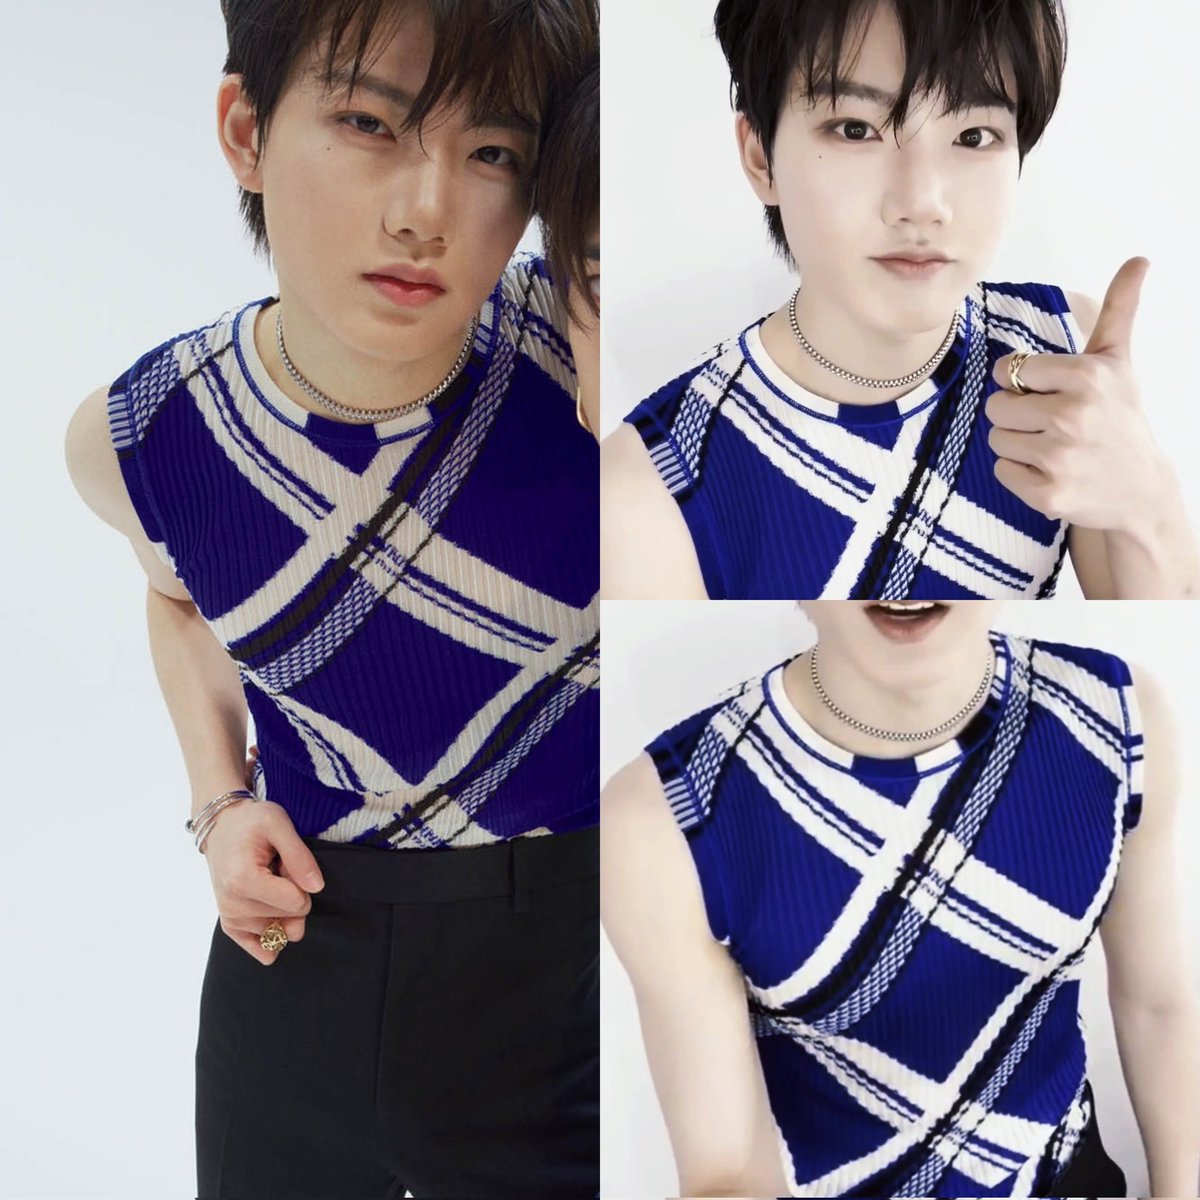 snatched waist, broad shoulders, visual top tier, chest out, junkyu on vogue. sure kjk1 soon. amen.